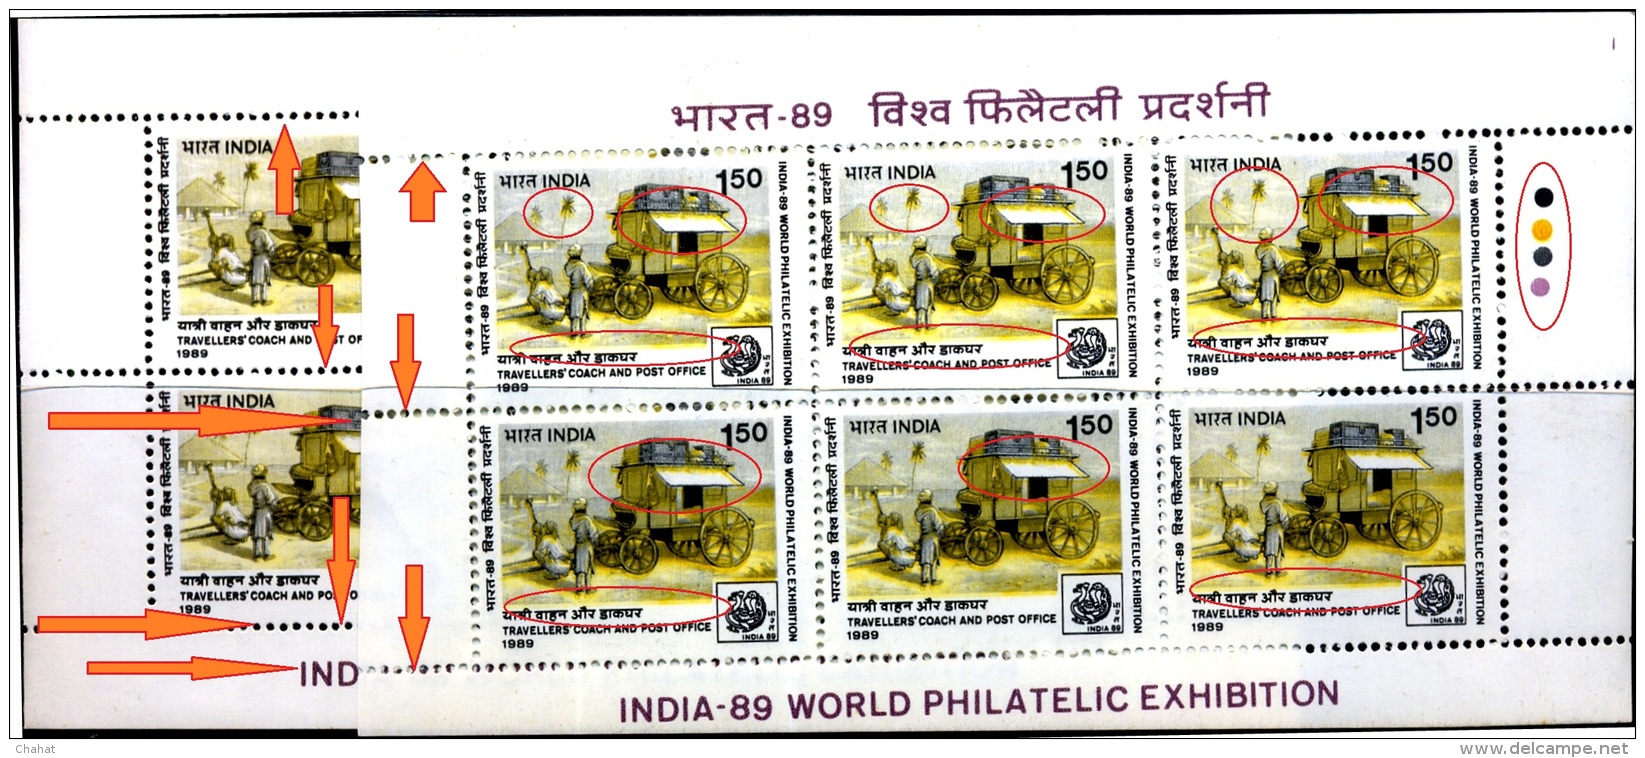 TRAVELLER'S COACH &amp; POST OFFICE-ERROR-INDIA 89-WORLD PHILATELIC EXHIBITION-BOOKLET PANES-EXTREMELY SCARCE-MNH-M-145